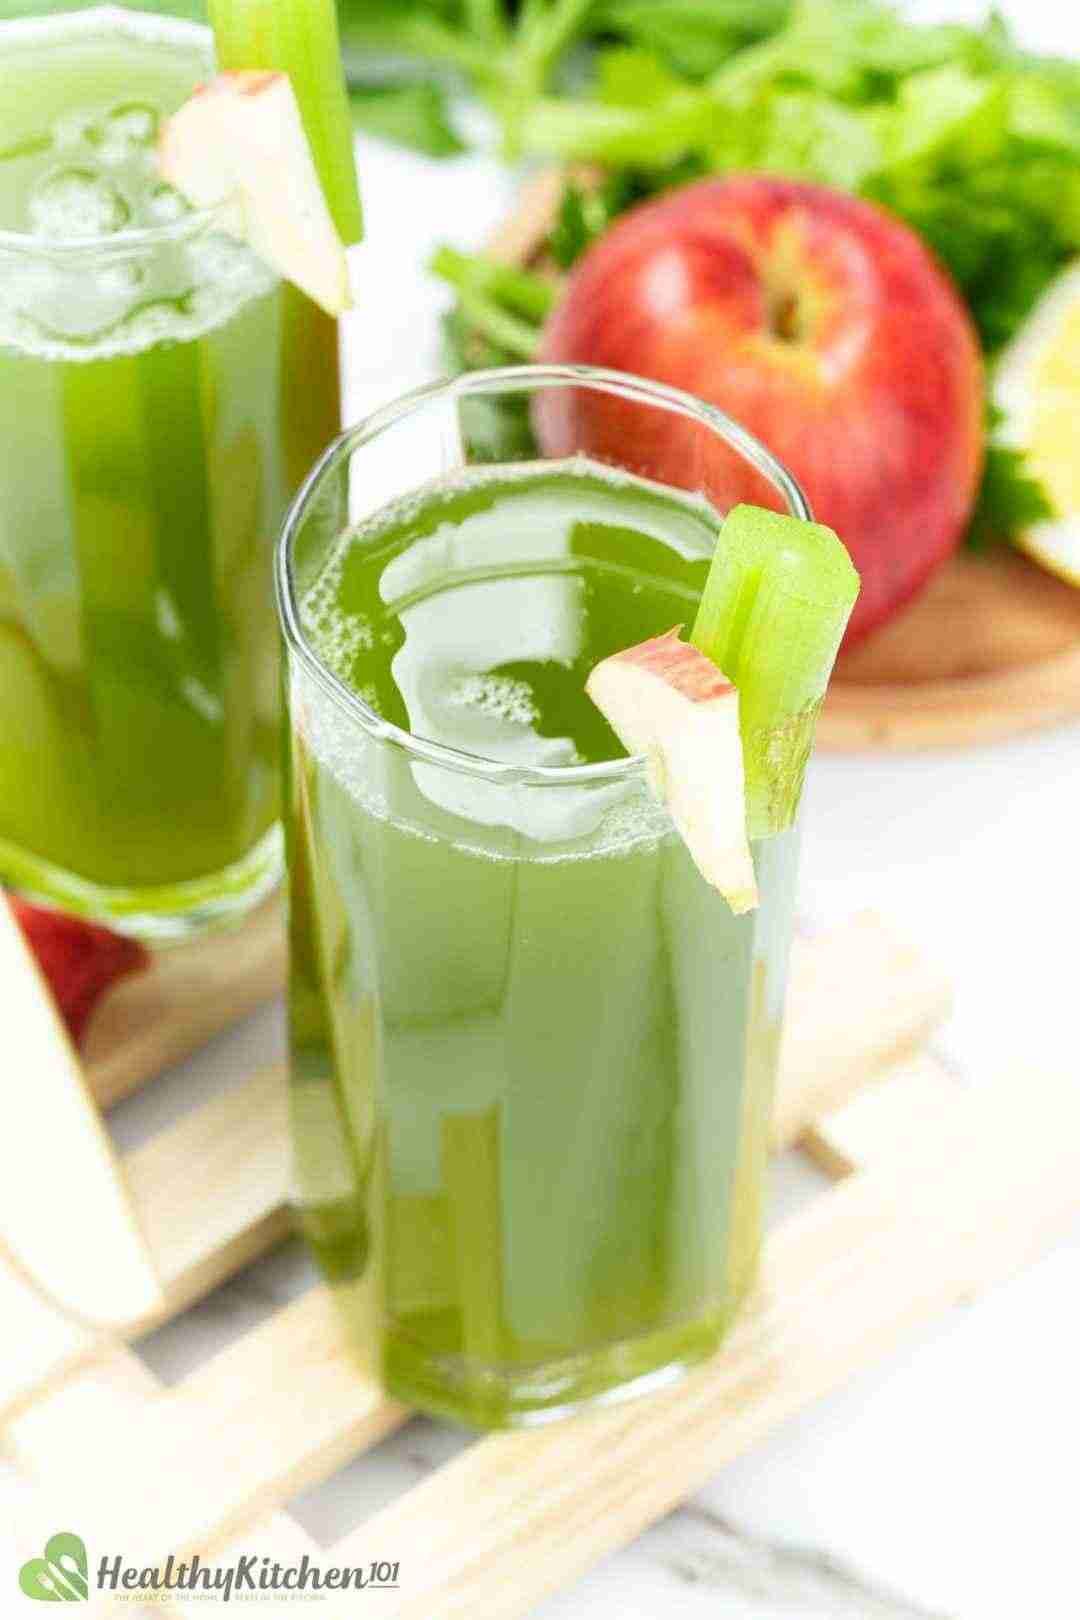 Is Celery And Apple Juice Good For You